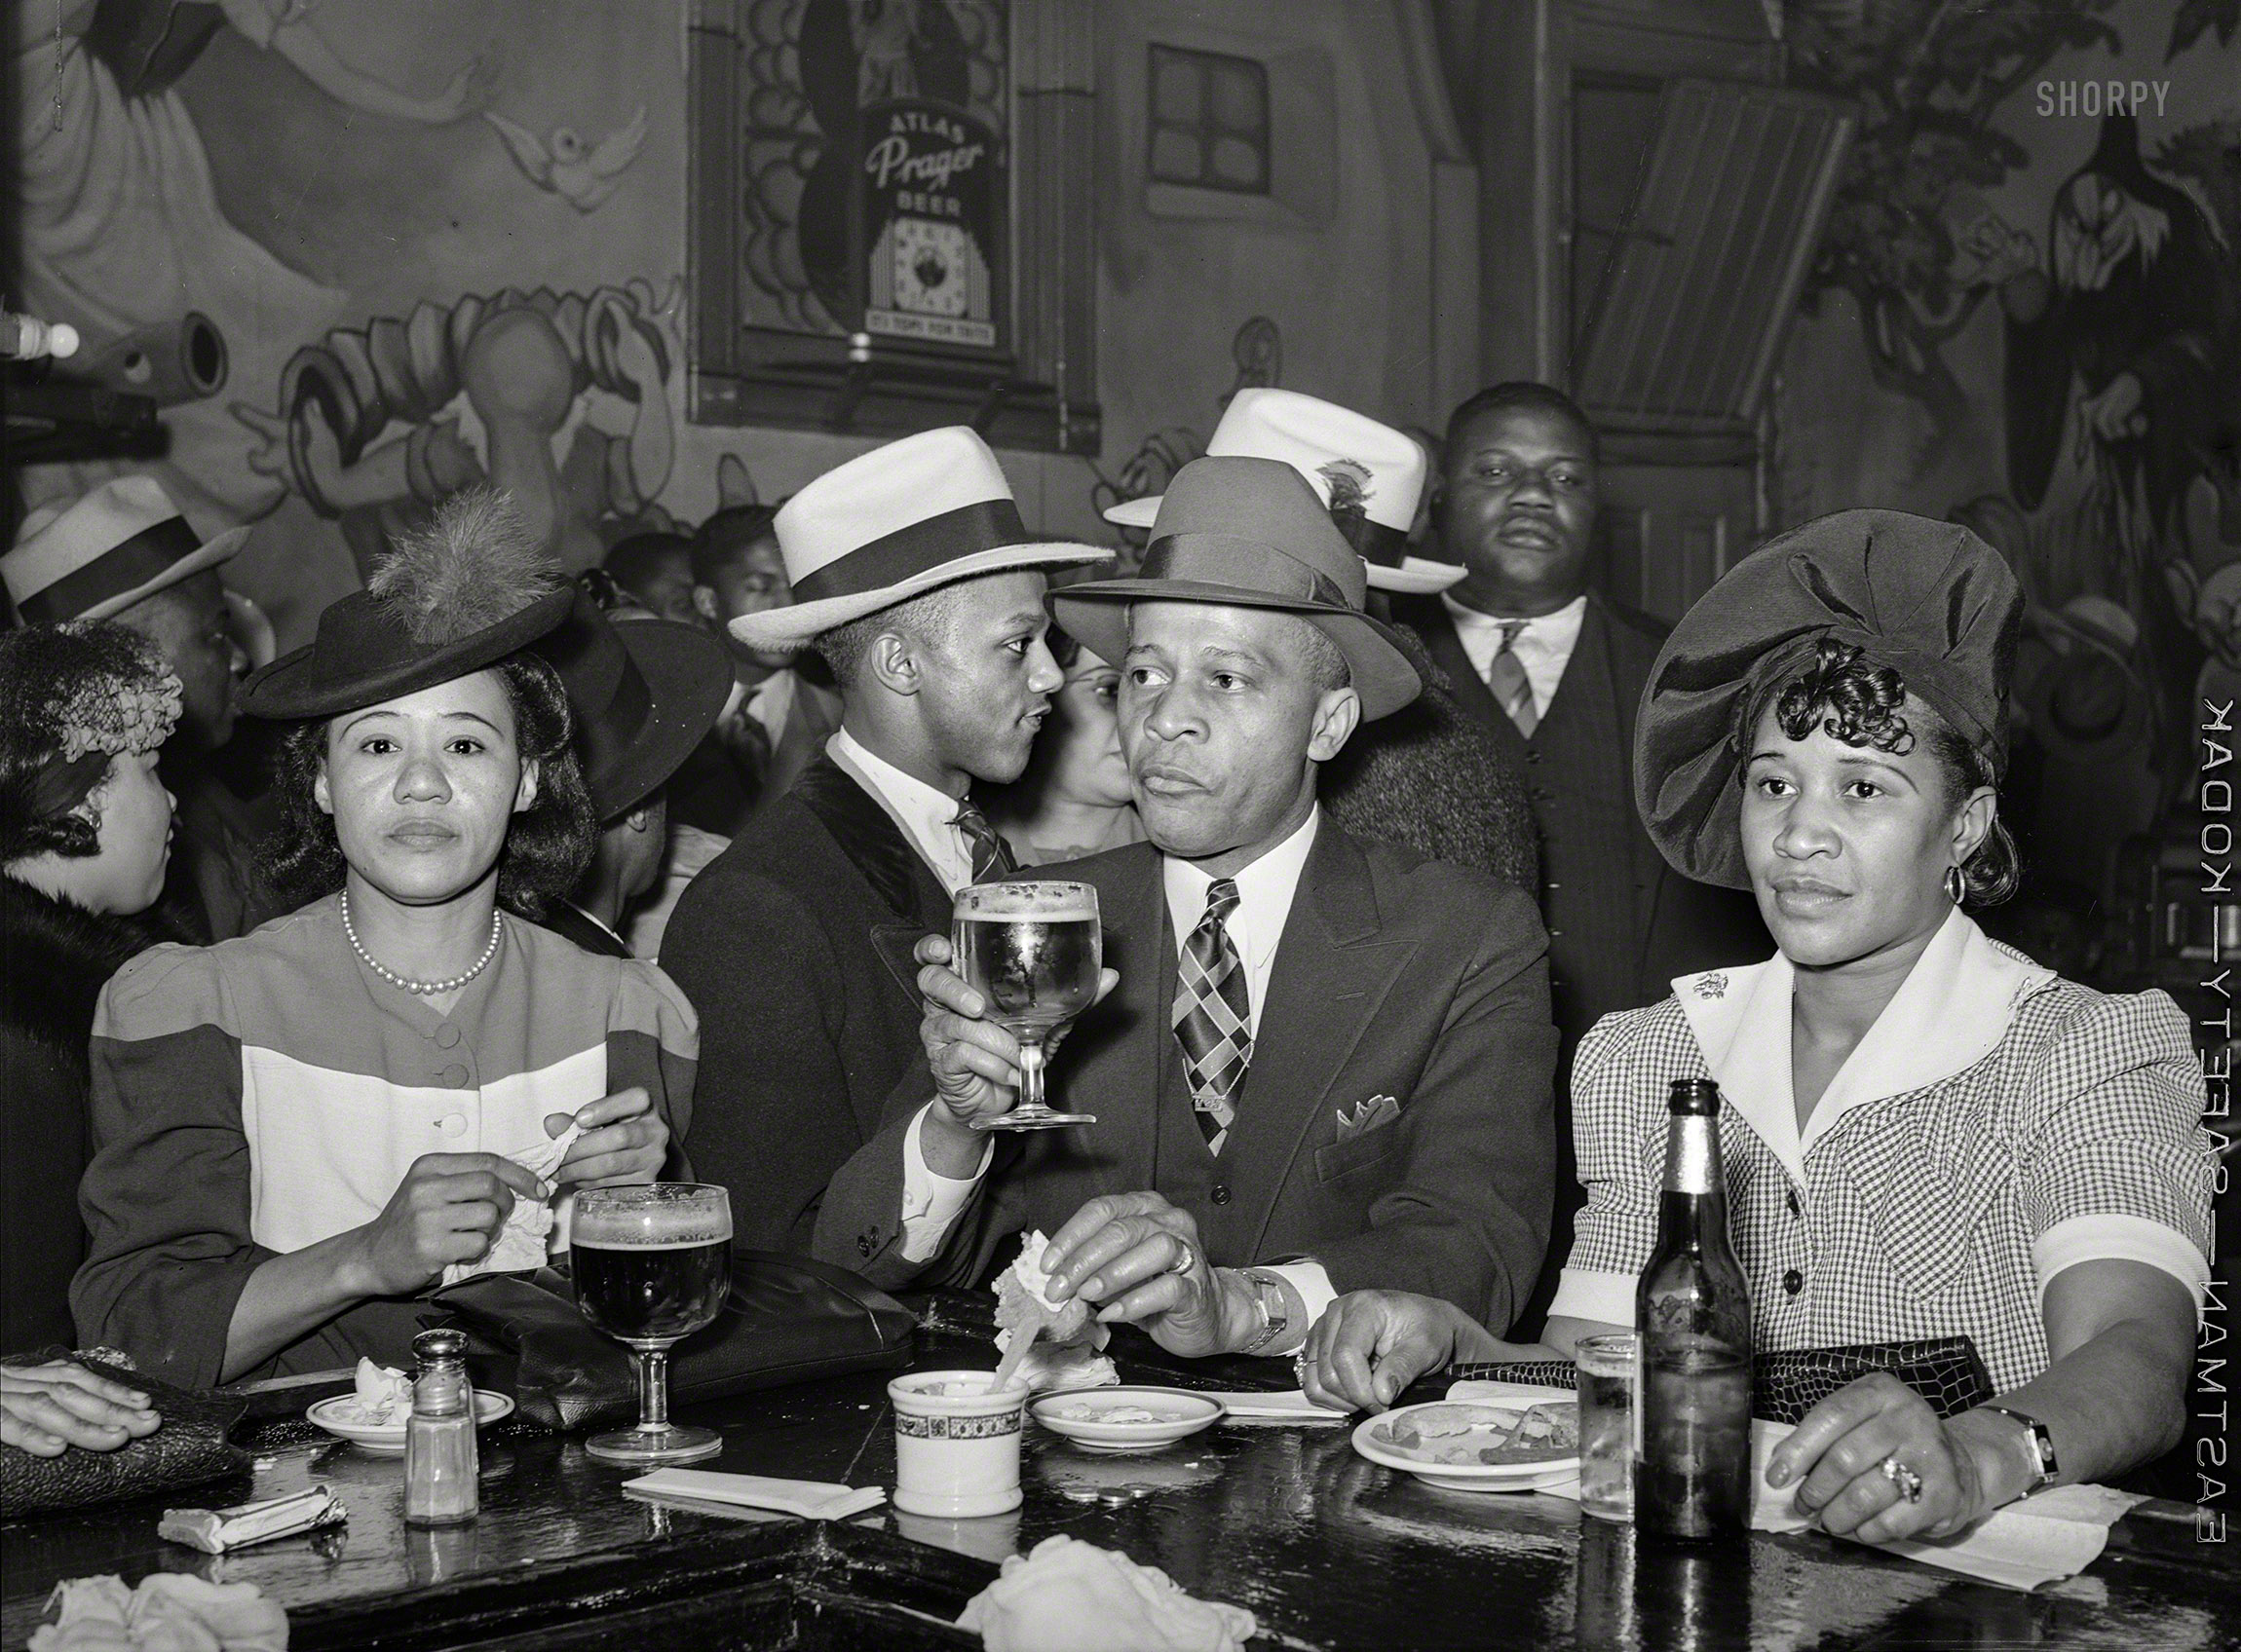 April 1941. "South Side Chicago. Scene in Negro tavern." The walls adorned with murals from the Disney version of "Snow White." Medium format negative by Russell Lee for the Farm Security Administration. View full size.